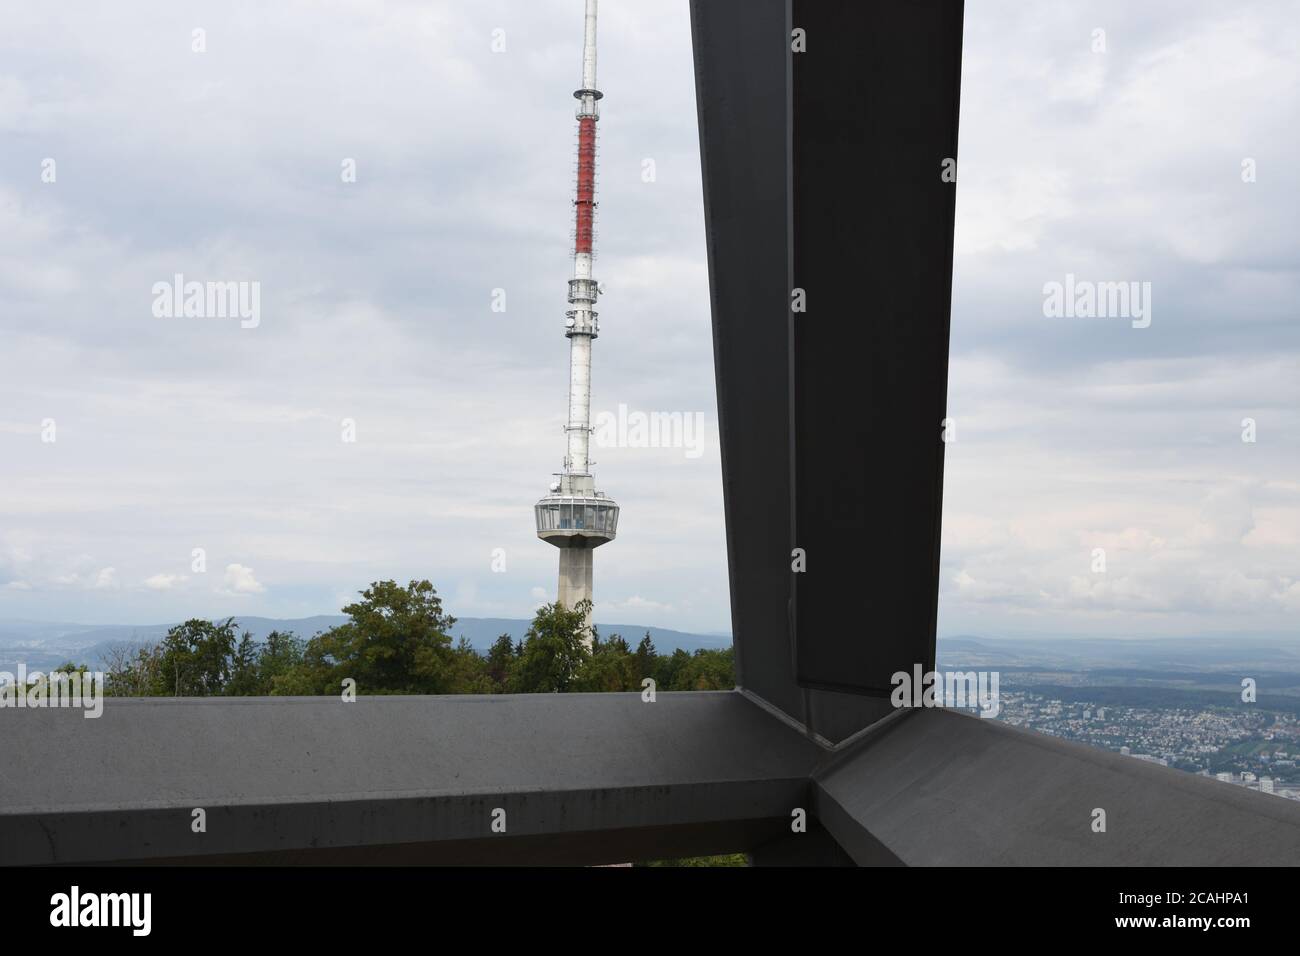 Uetliberg TV-tower freestanding concrete tower used for radio and TV transmission on Uto Kulm near Zürich, Switzerland. View from Uetliberg look tower. Stock Photo